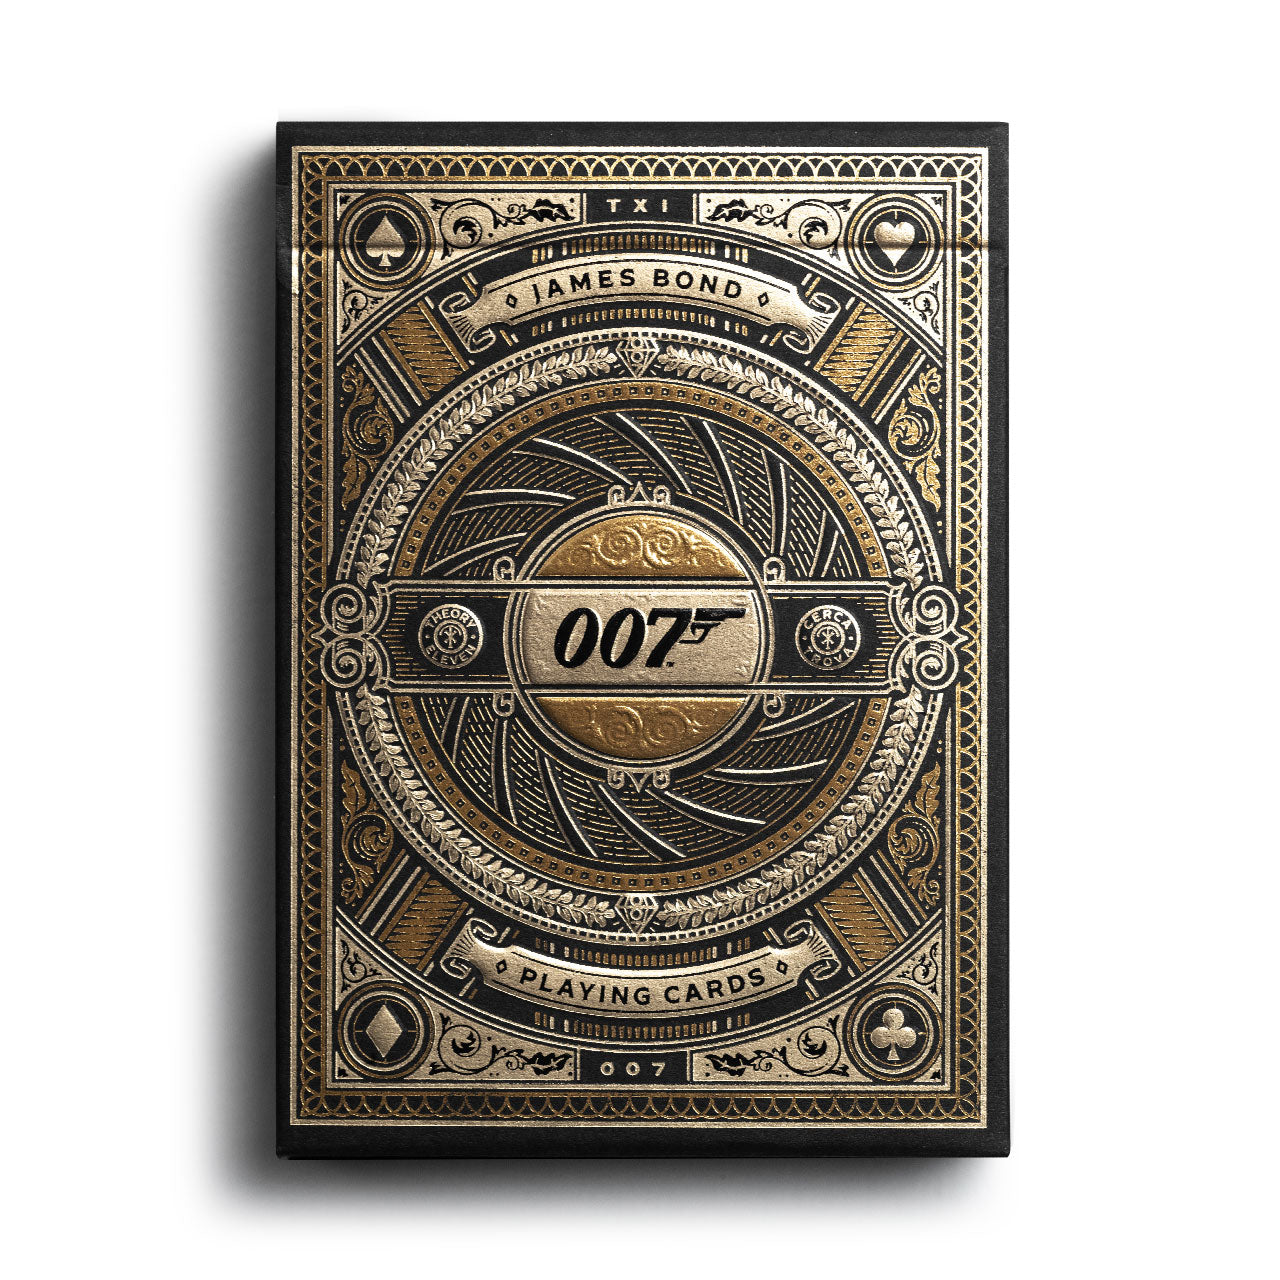 James Bond 007 Playing Cards by Theory11